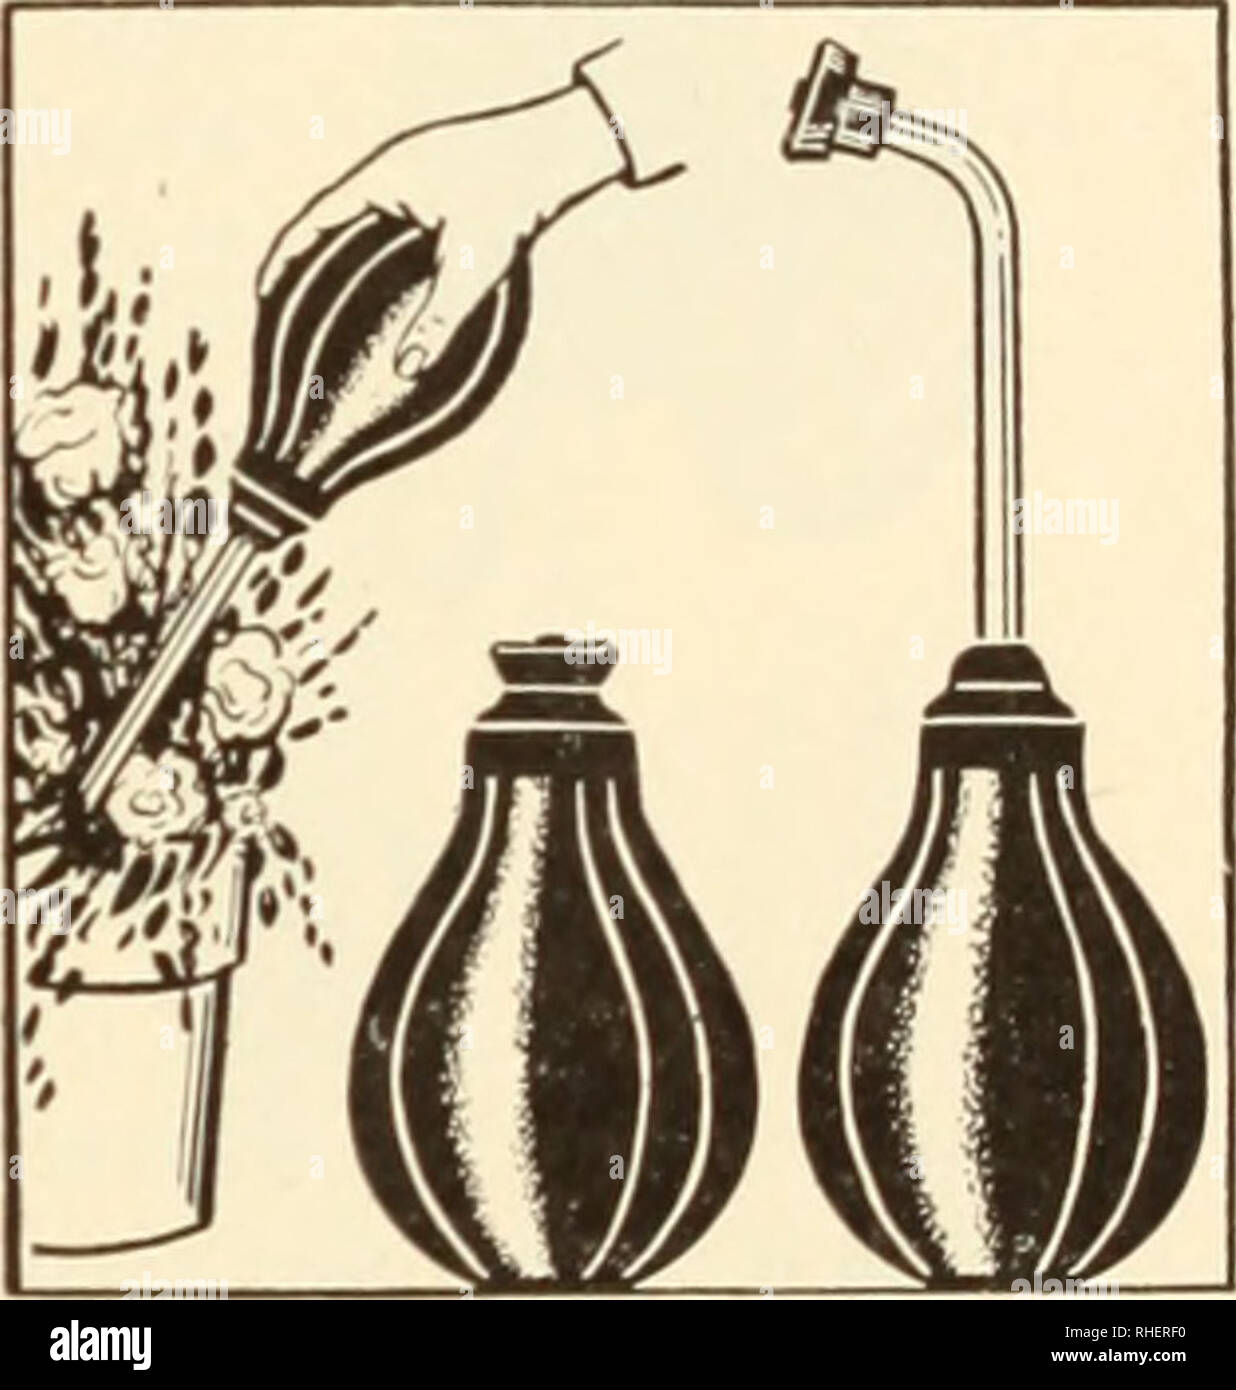 . Bolgiano's capitol city seeds. Nurseries (Horticulture) Catalogs; Bulbs (Plants) Catalogs; Vegetables Catalogs; Garden tools Catalogs; Seeds Catalogs. A TURN OF THE FAUCET INSTANTLY CONVERTS IT FROM A SOAKER TO A PORTABLE SPRINKLING SYSTEM No run-off No waste- No. 0. 12 It. $1 80 No. 1. 18 ft... 2 40 I -No soil-washing No. 2. JO ft...$3 70 No. 3. 50 ft... 6 00 Sprabulb. For years florists, seedsmen and house- wives throughout the U. S. A. have found the handv Sprabulb an excellent water and powder sprayer for plants. 8-oz. $1.00; 12- 1 50. 8-oz.: Cetrospray 1.50: 12-oz.S2.00. G. S. Master Sp Stock Photo